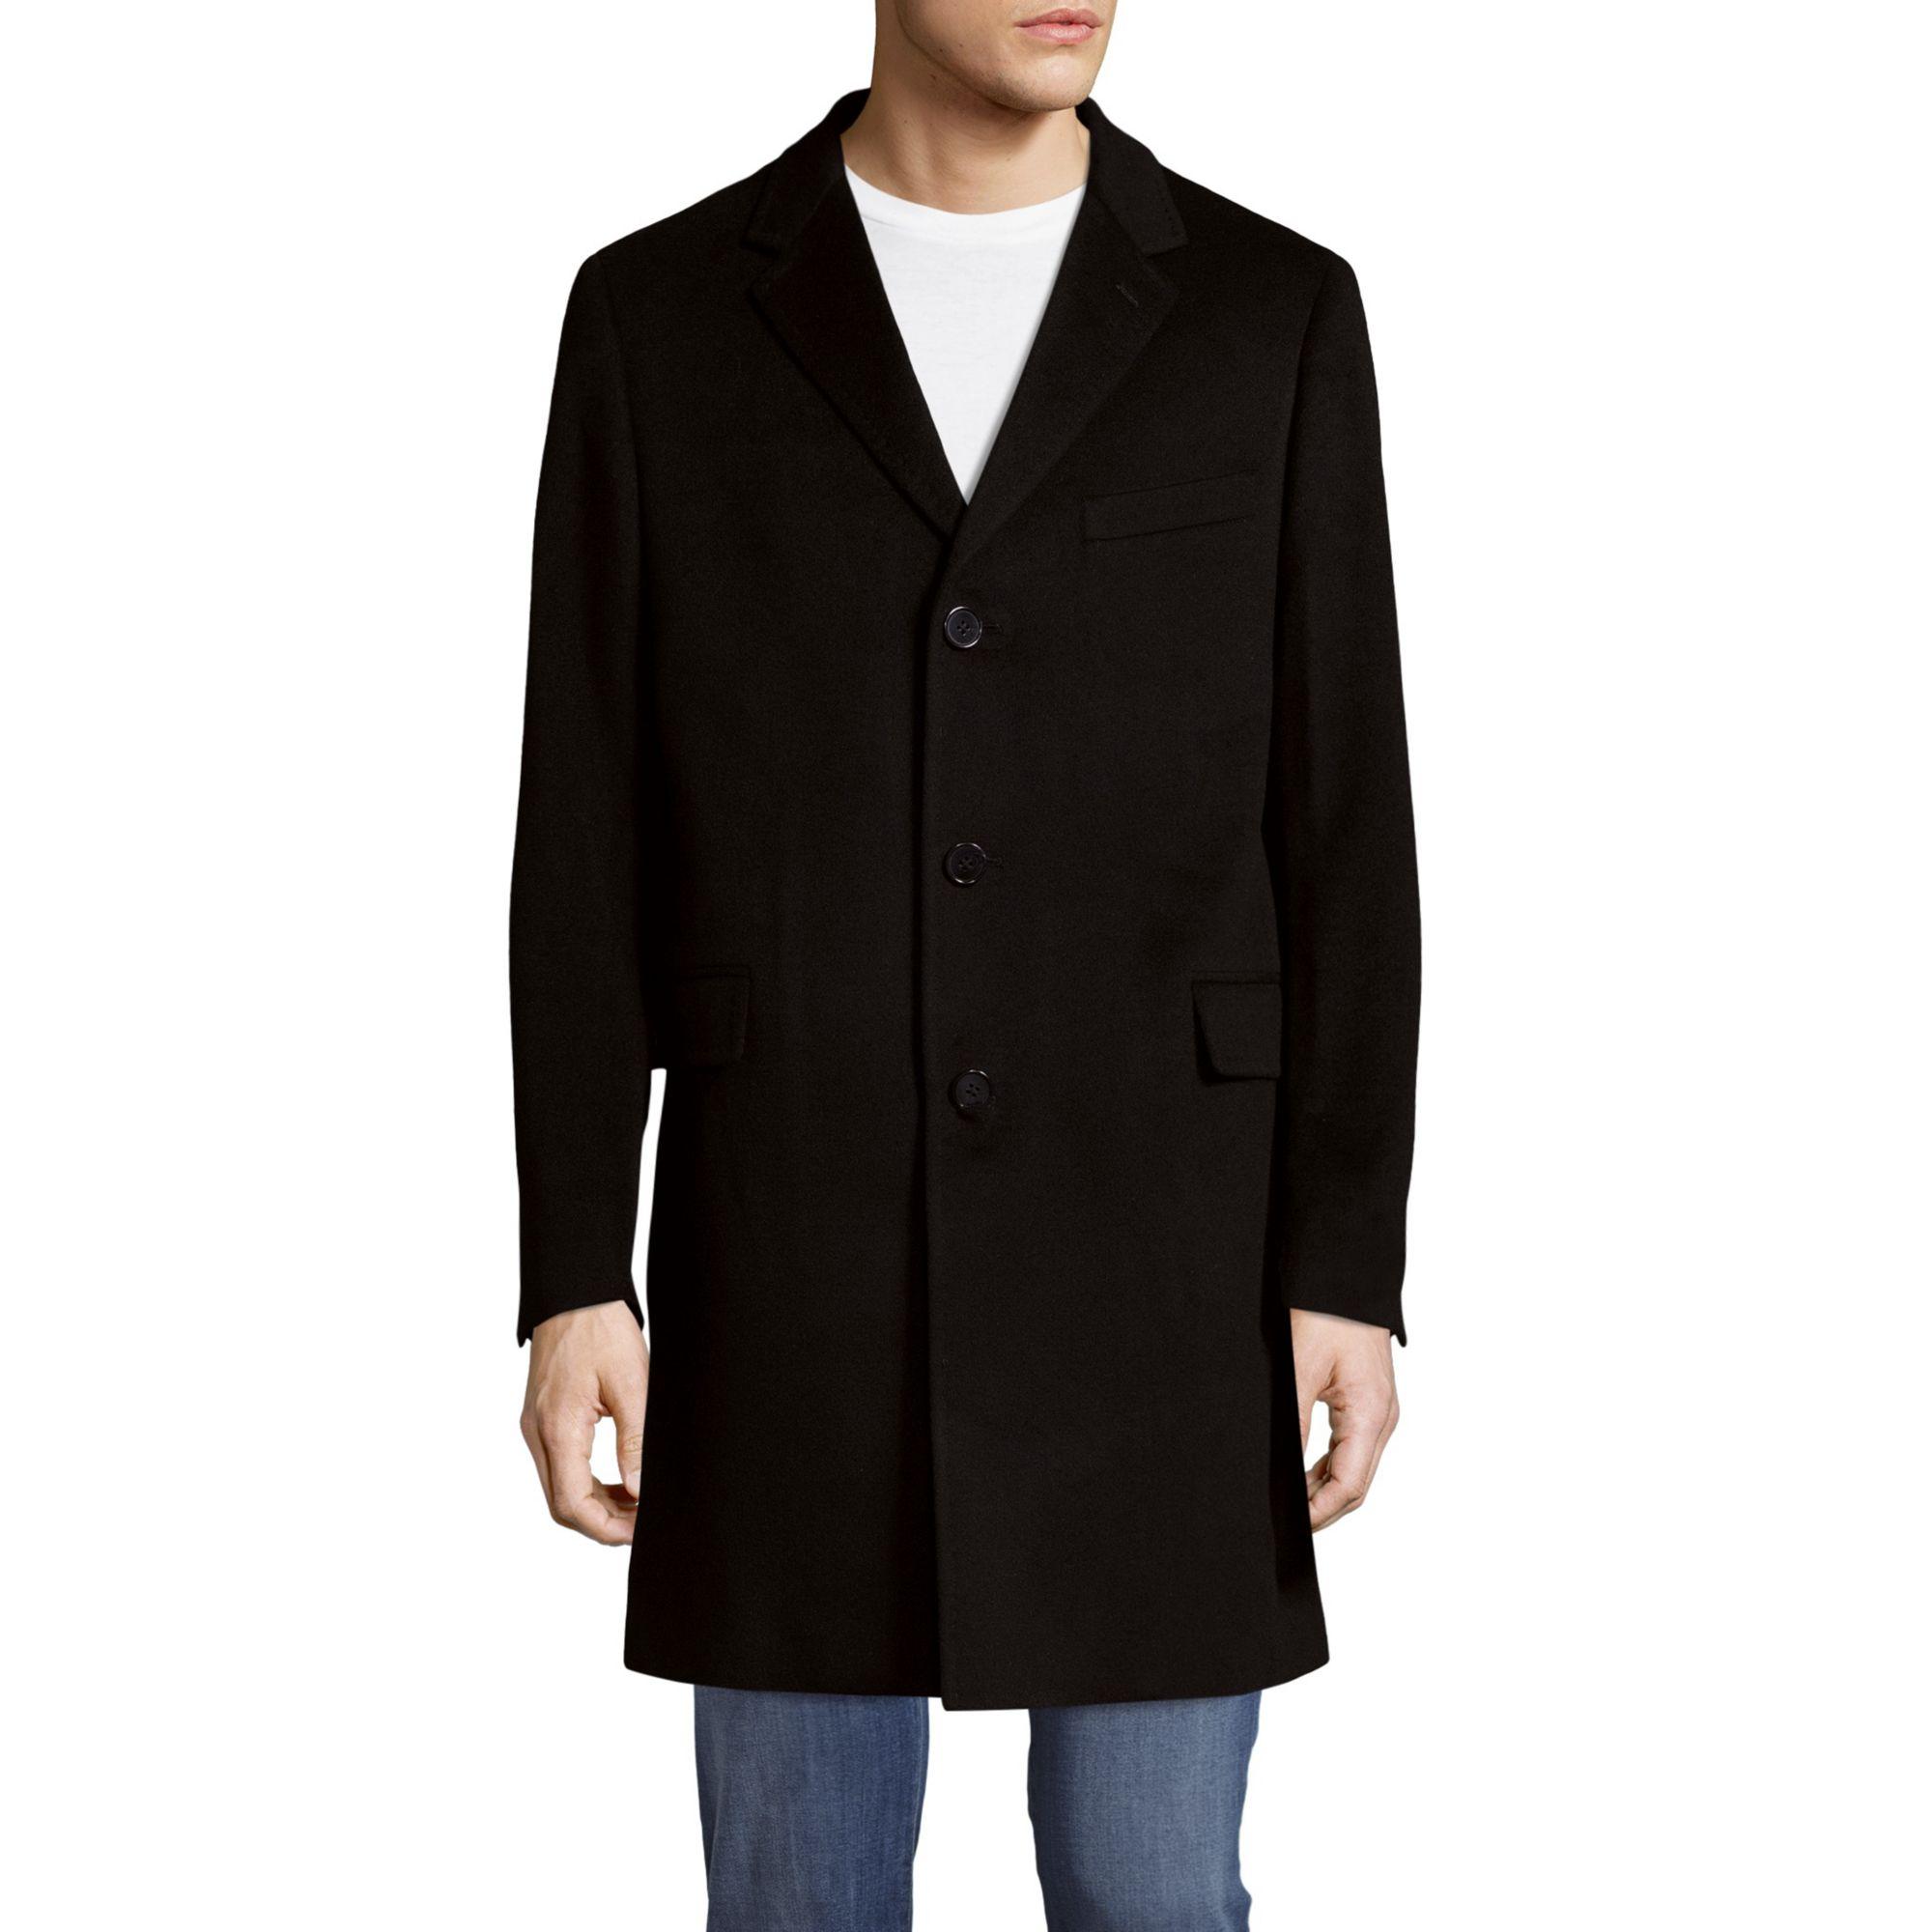 Saks Fifth Avenue Buttoned Cashmere Topcoat in Charcoal (Black) for Men ...